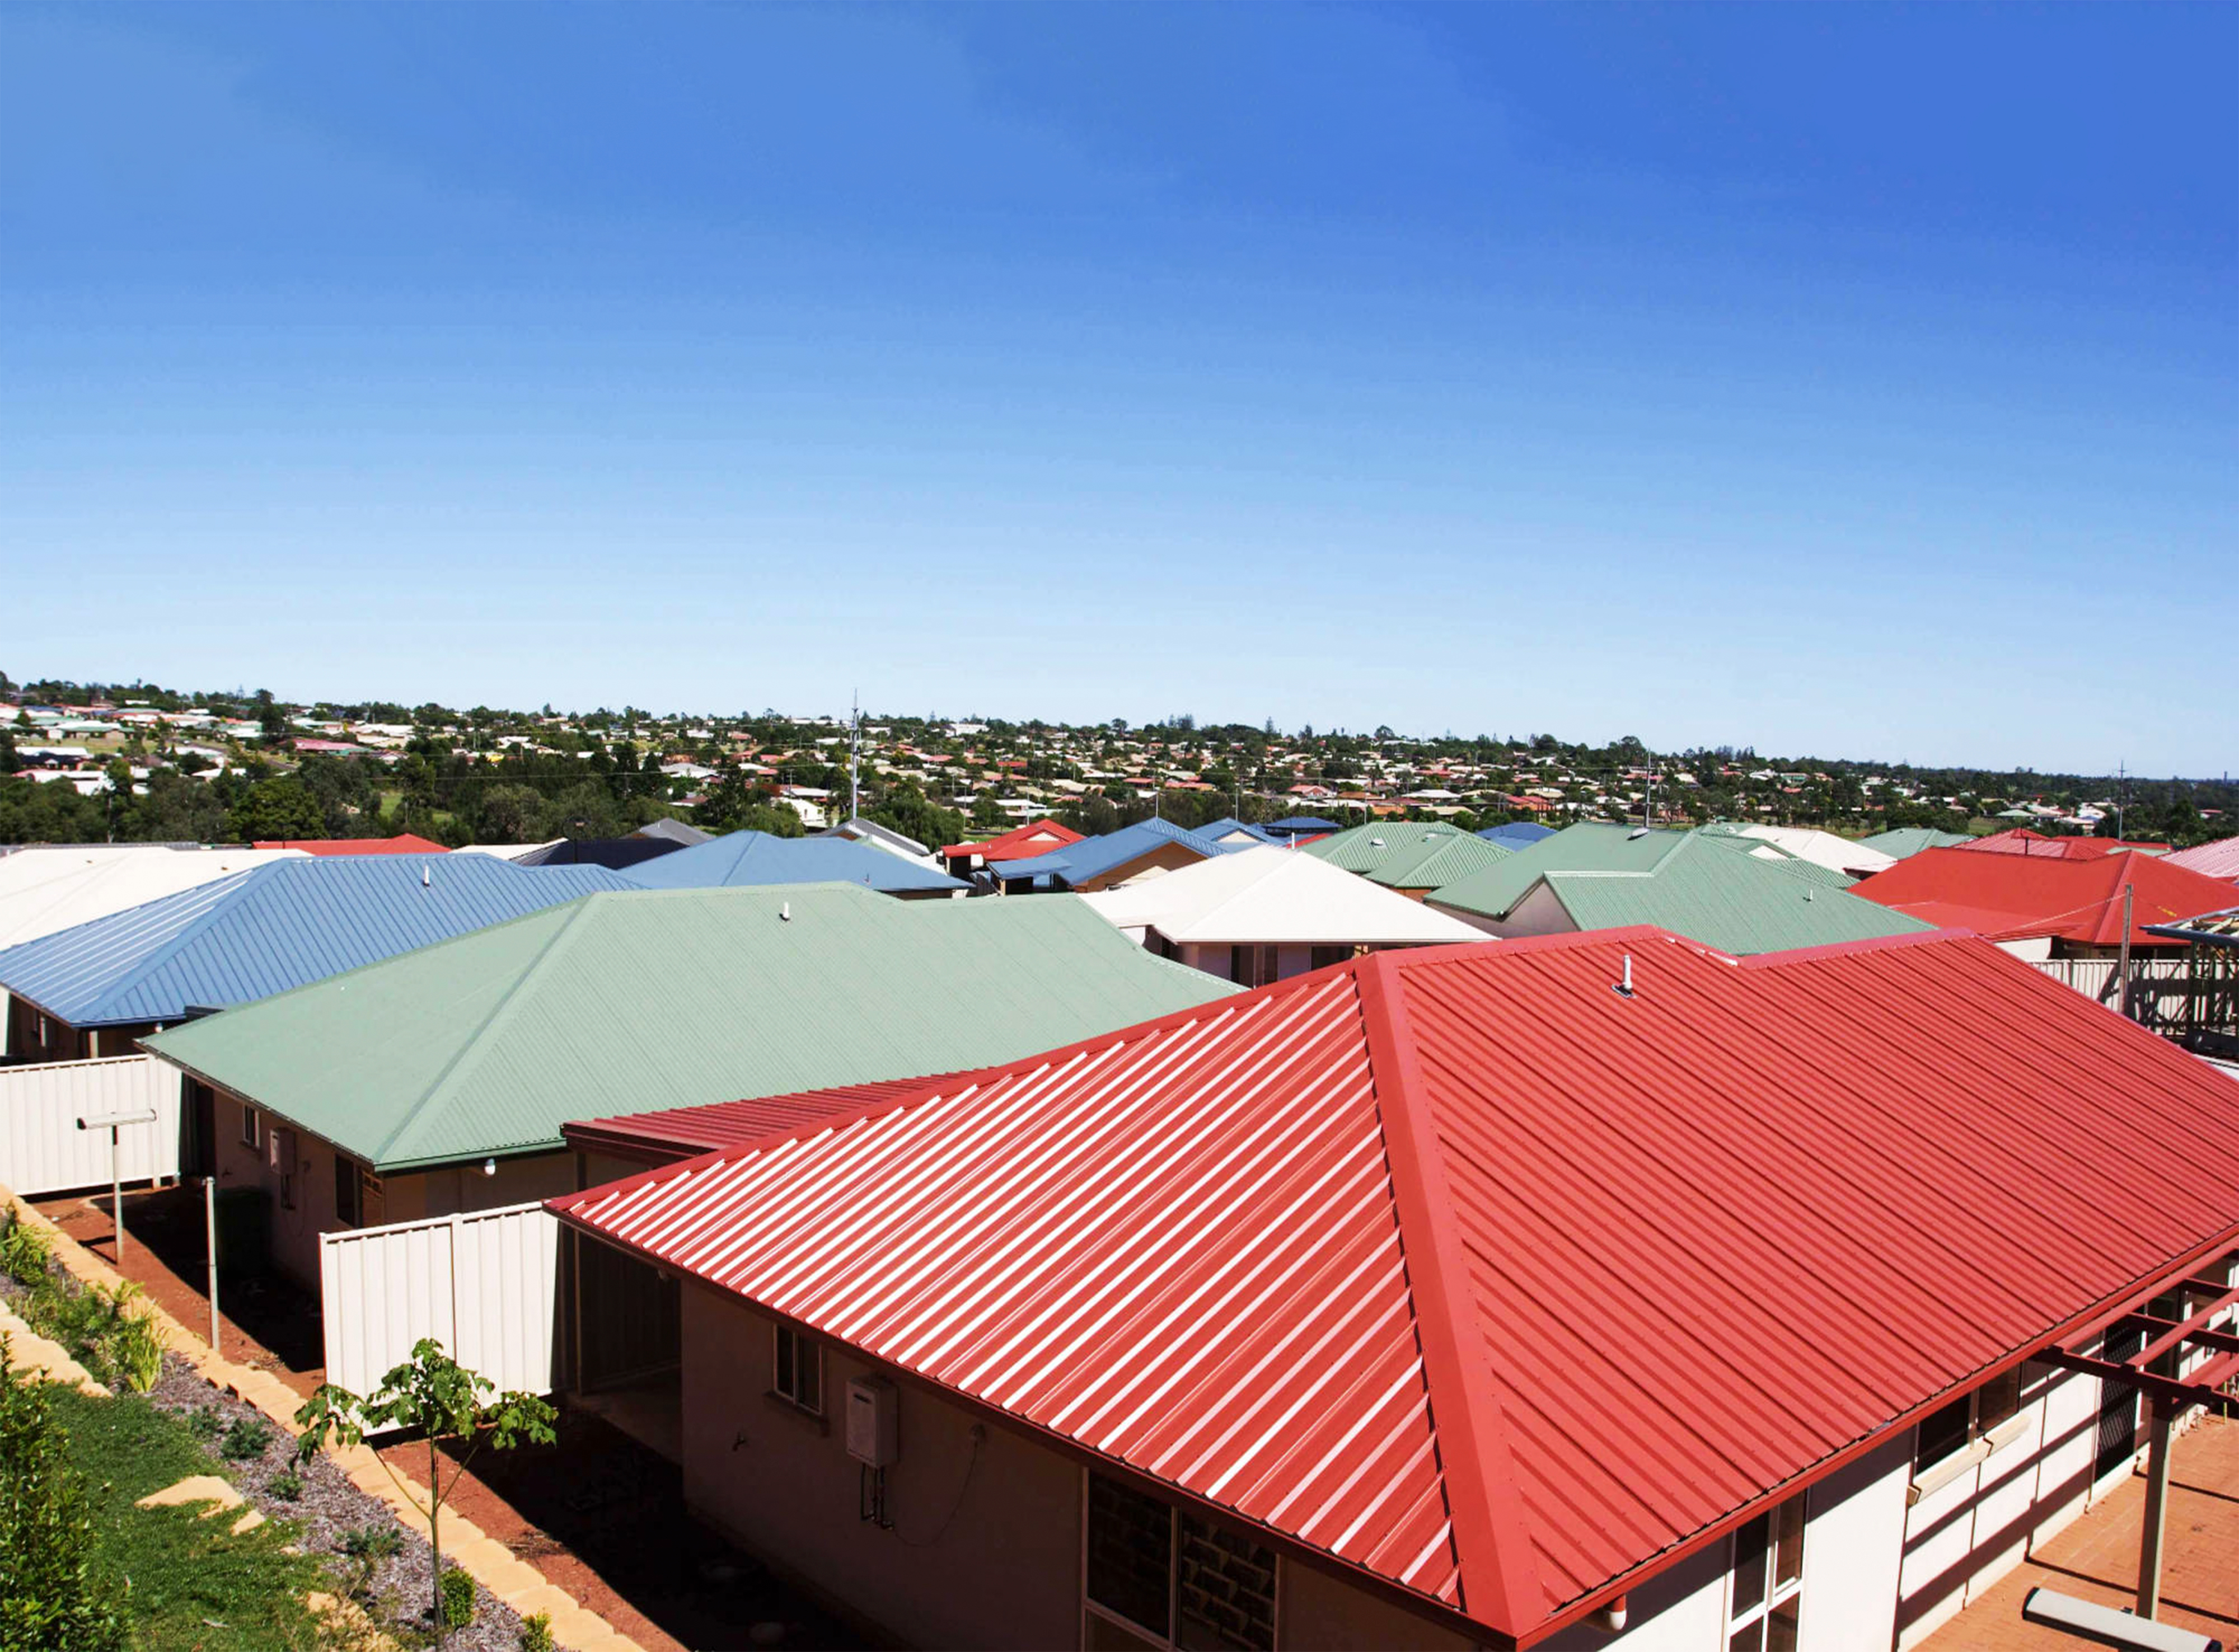 Advantages and disadvantages of metal roofs